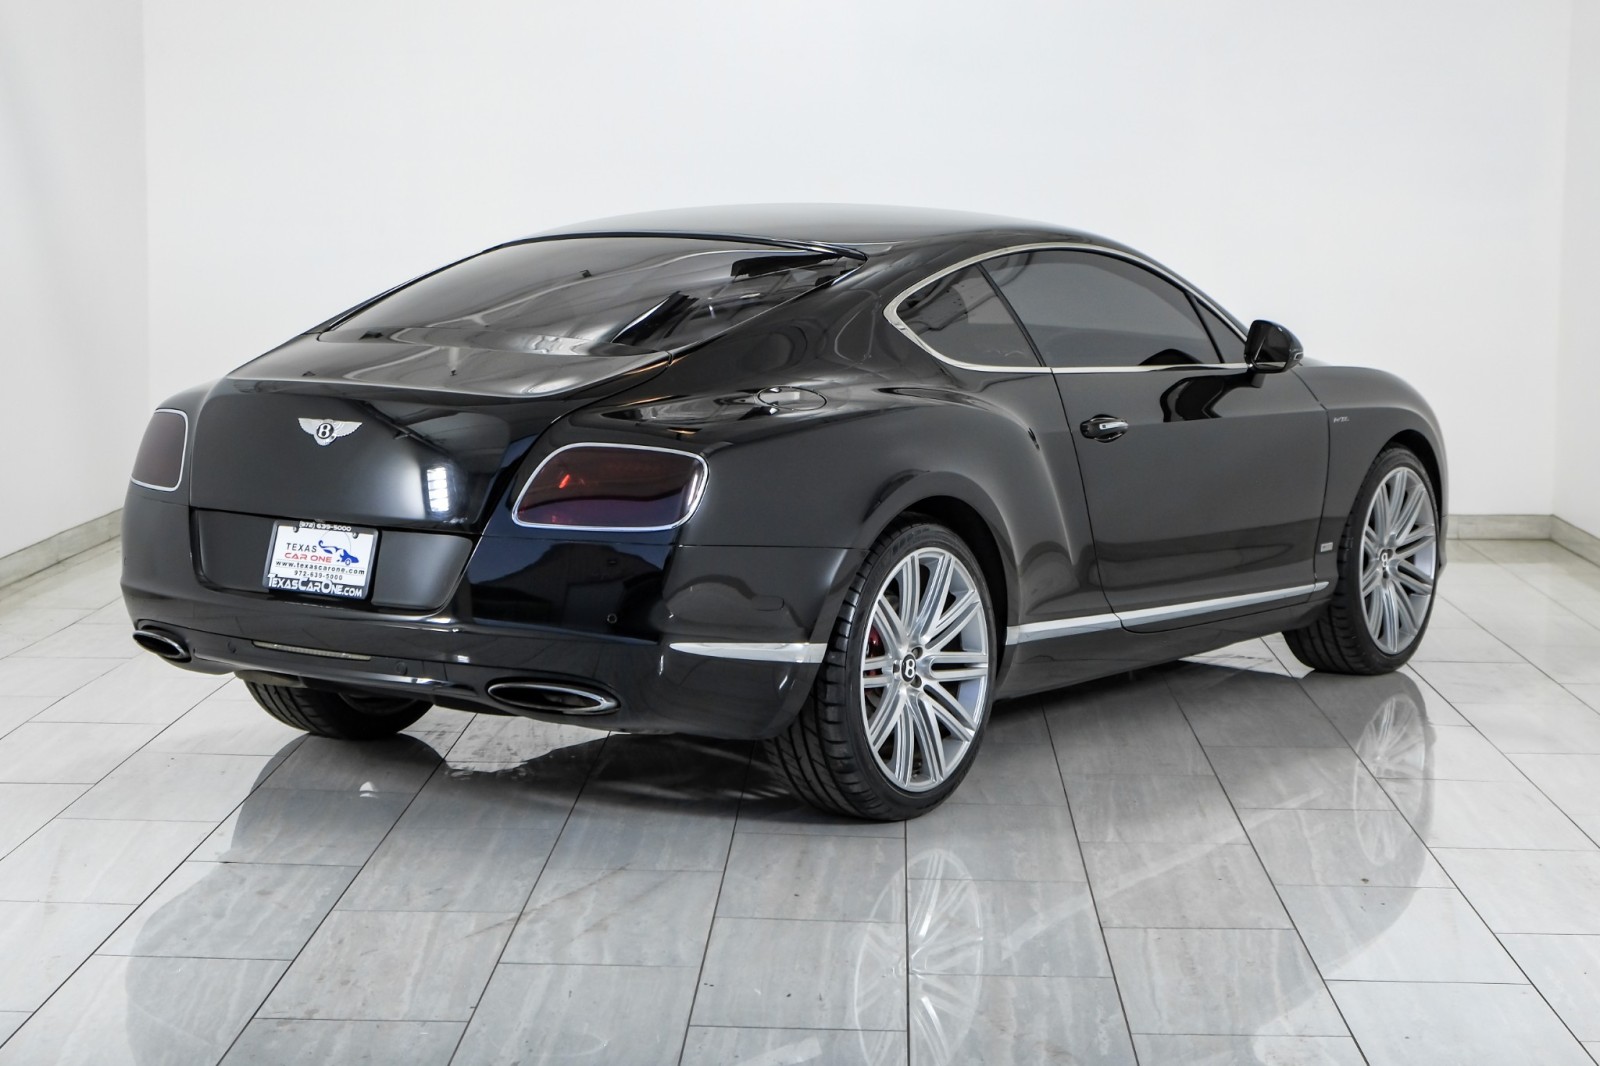 2013 Bentley Continental GT COUPE AWD W12 LA MANS EDITION 1 OF 48 NAVIGATION B 8